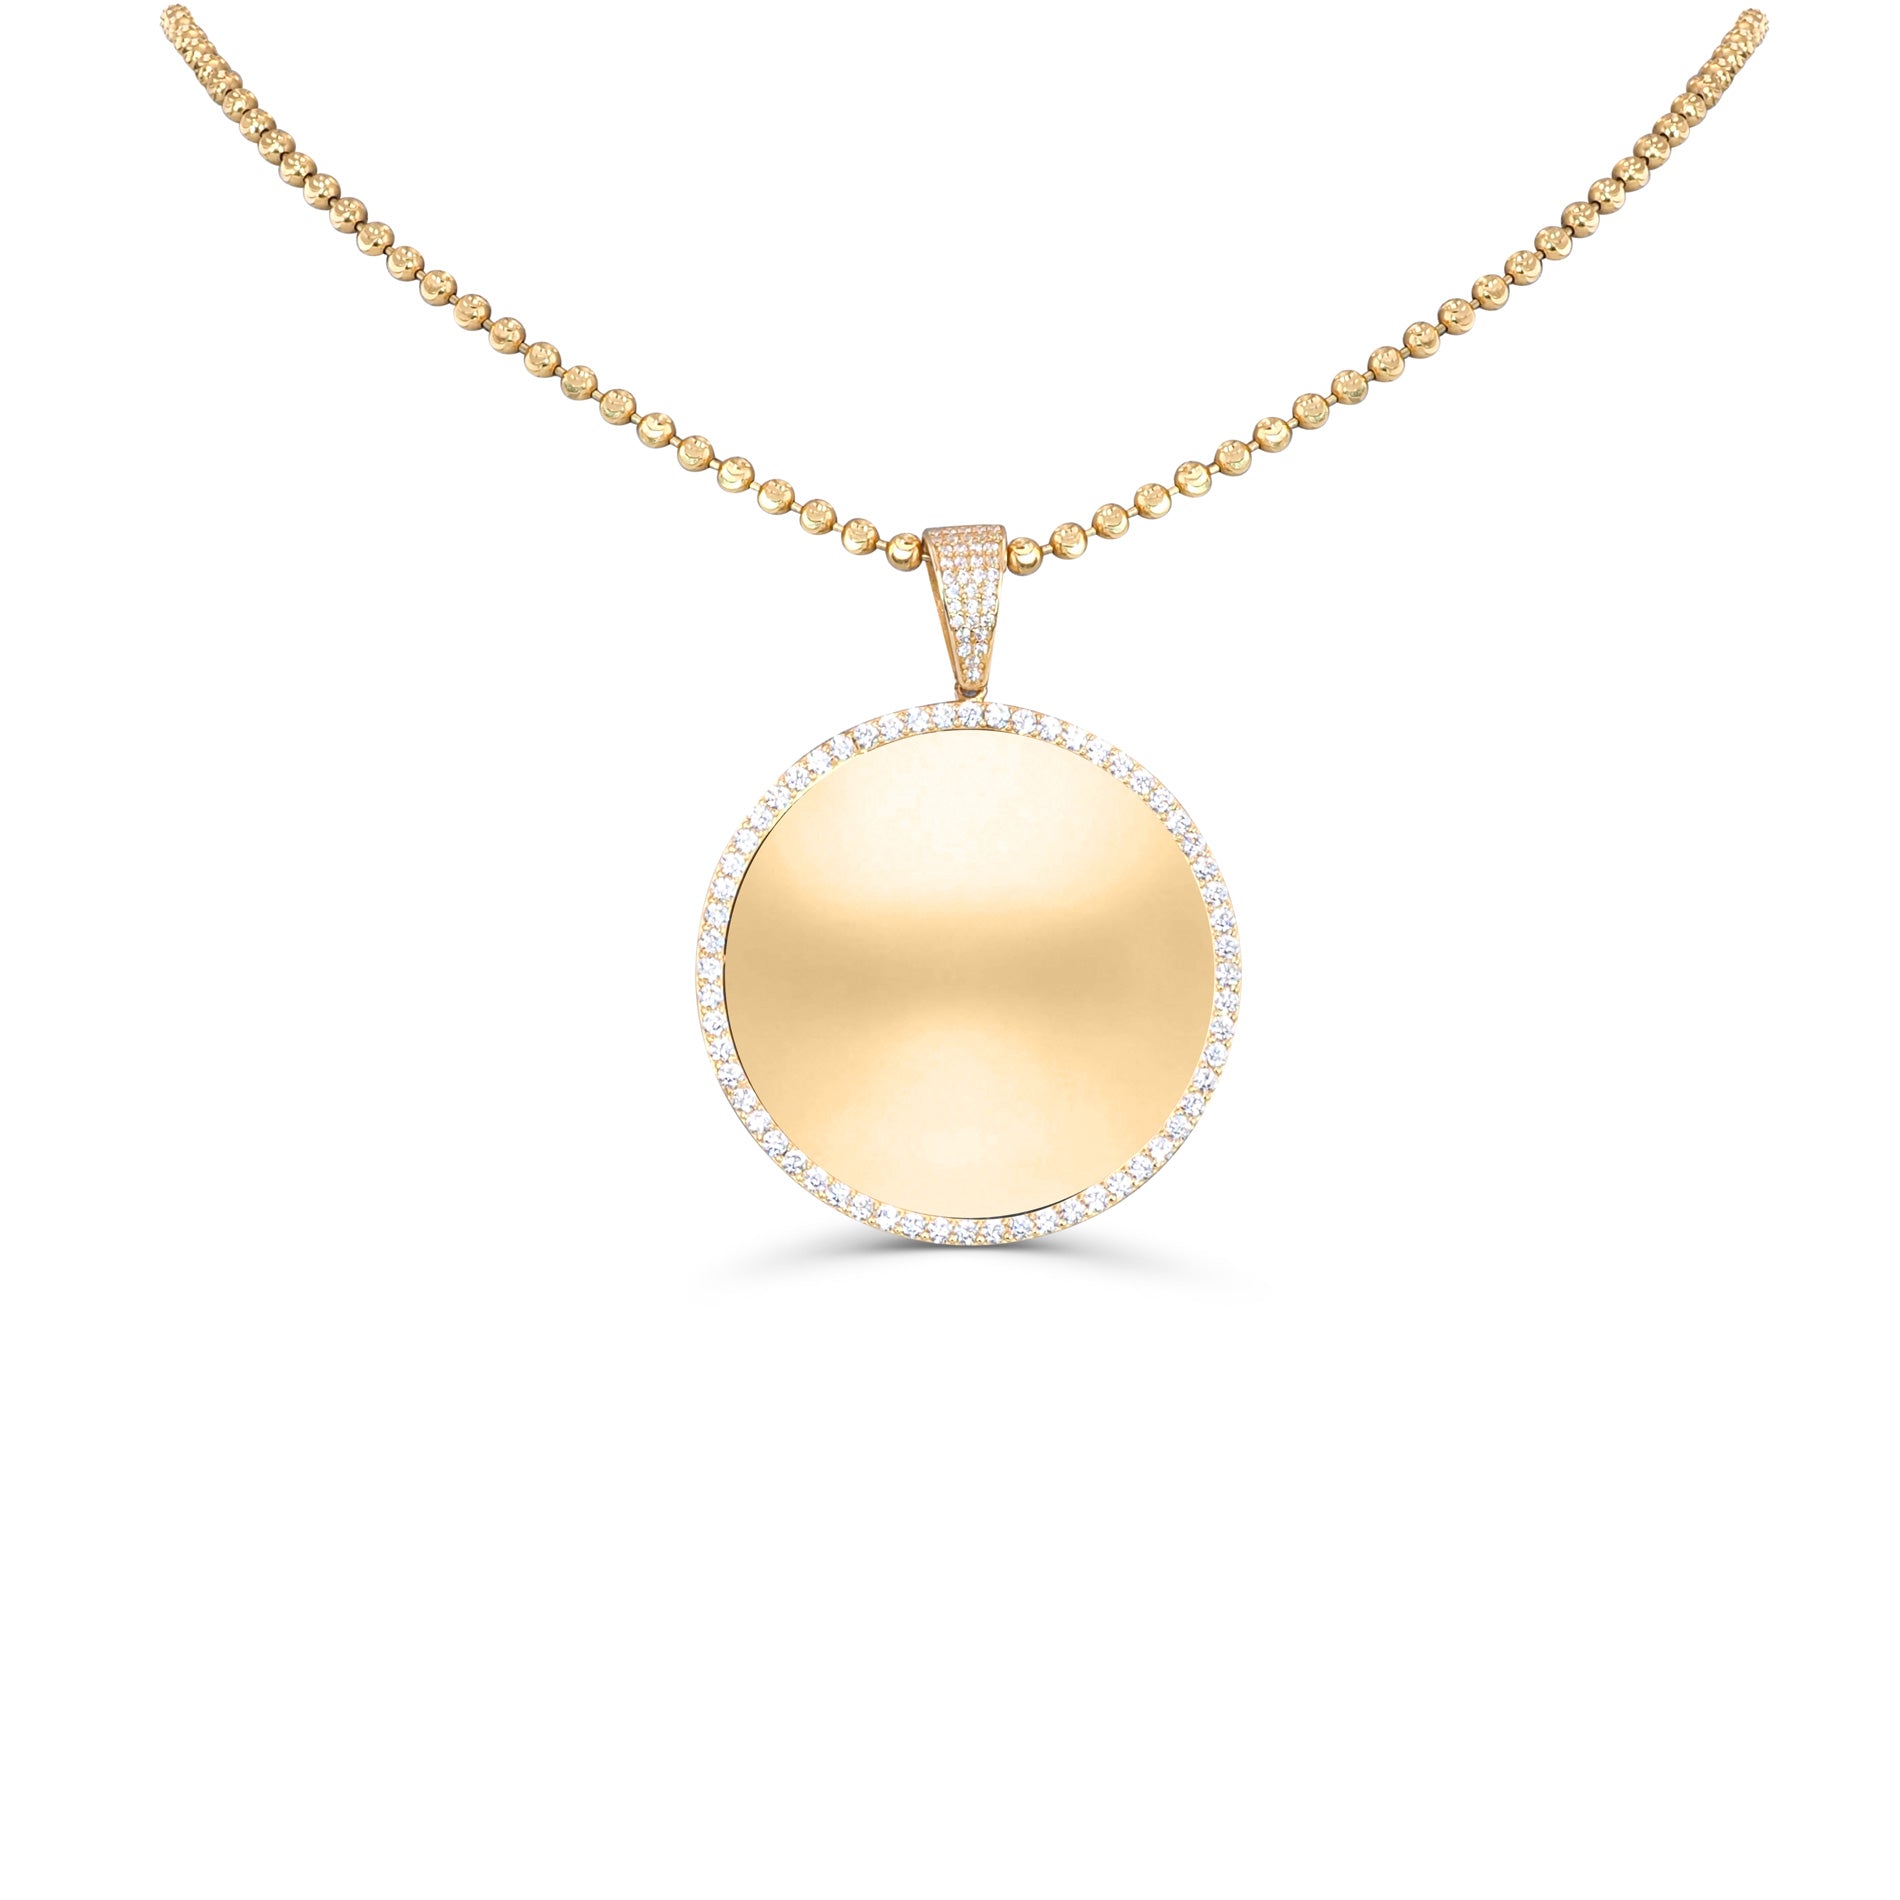 Create Your Signature Look with a Customizable 14K Gold Chain and Pendant Set